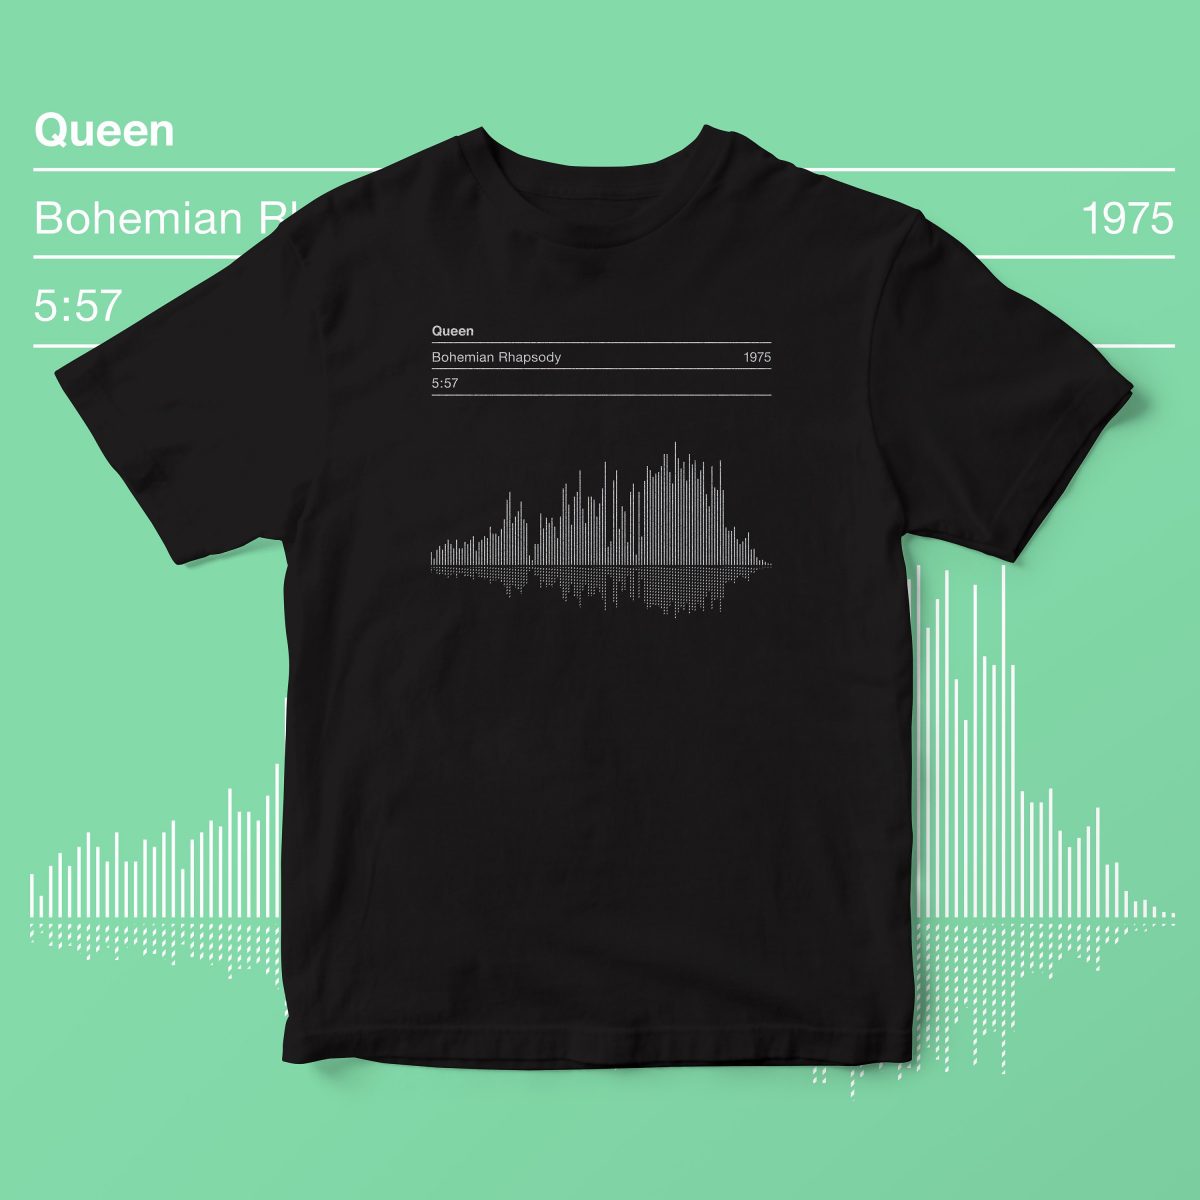 Sound wave t-shirts - various songs